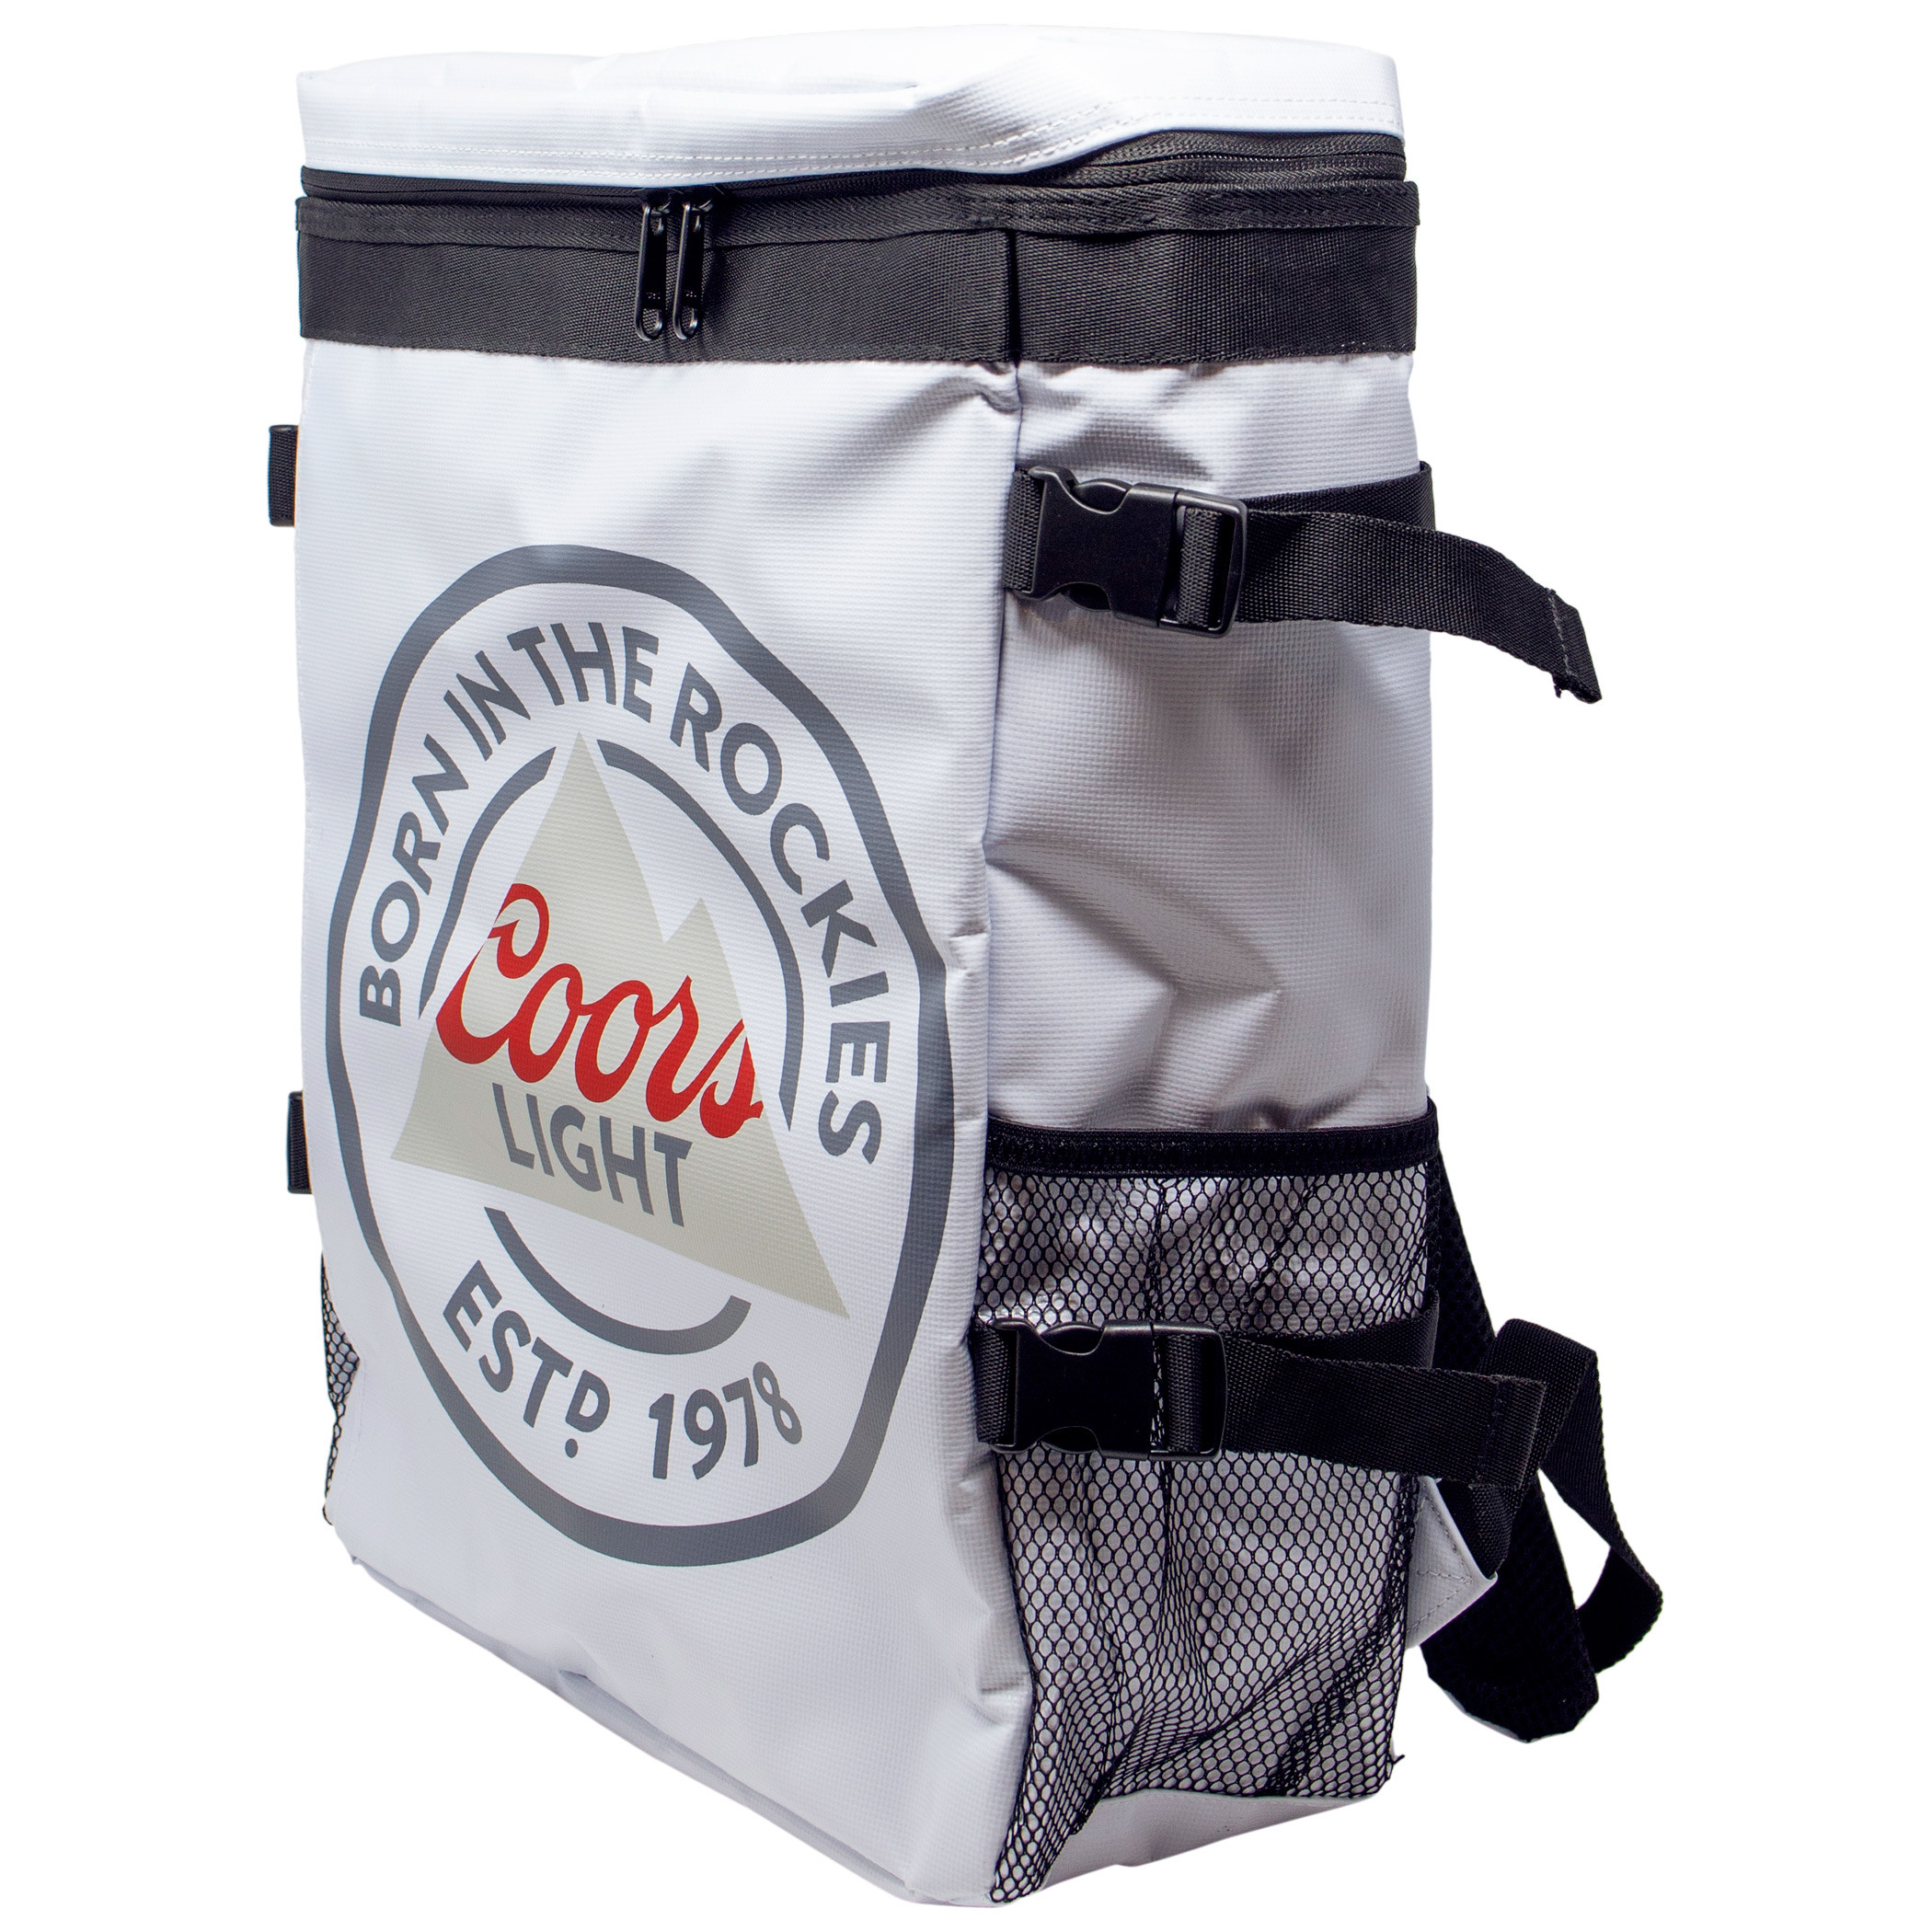 GREY COORS LIGHT BEER SOFT COOLER COLLAPSIBLE BAGS SILVER BULLET 2019 SET OF 2 